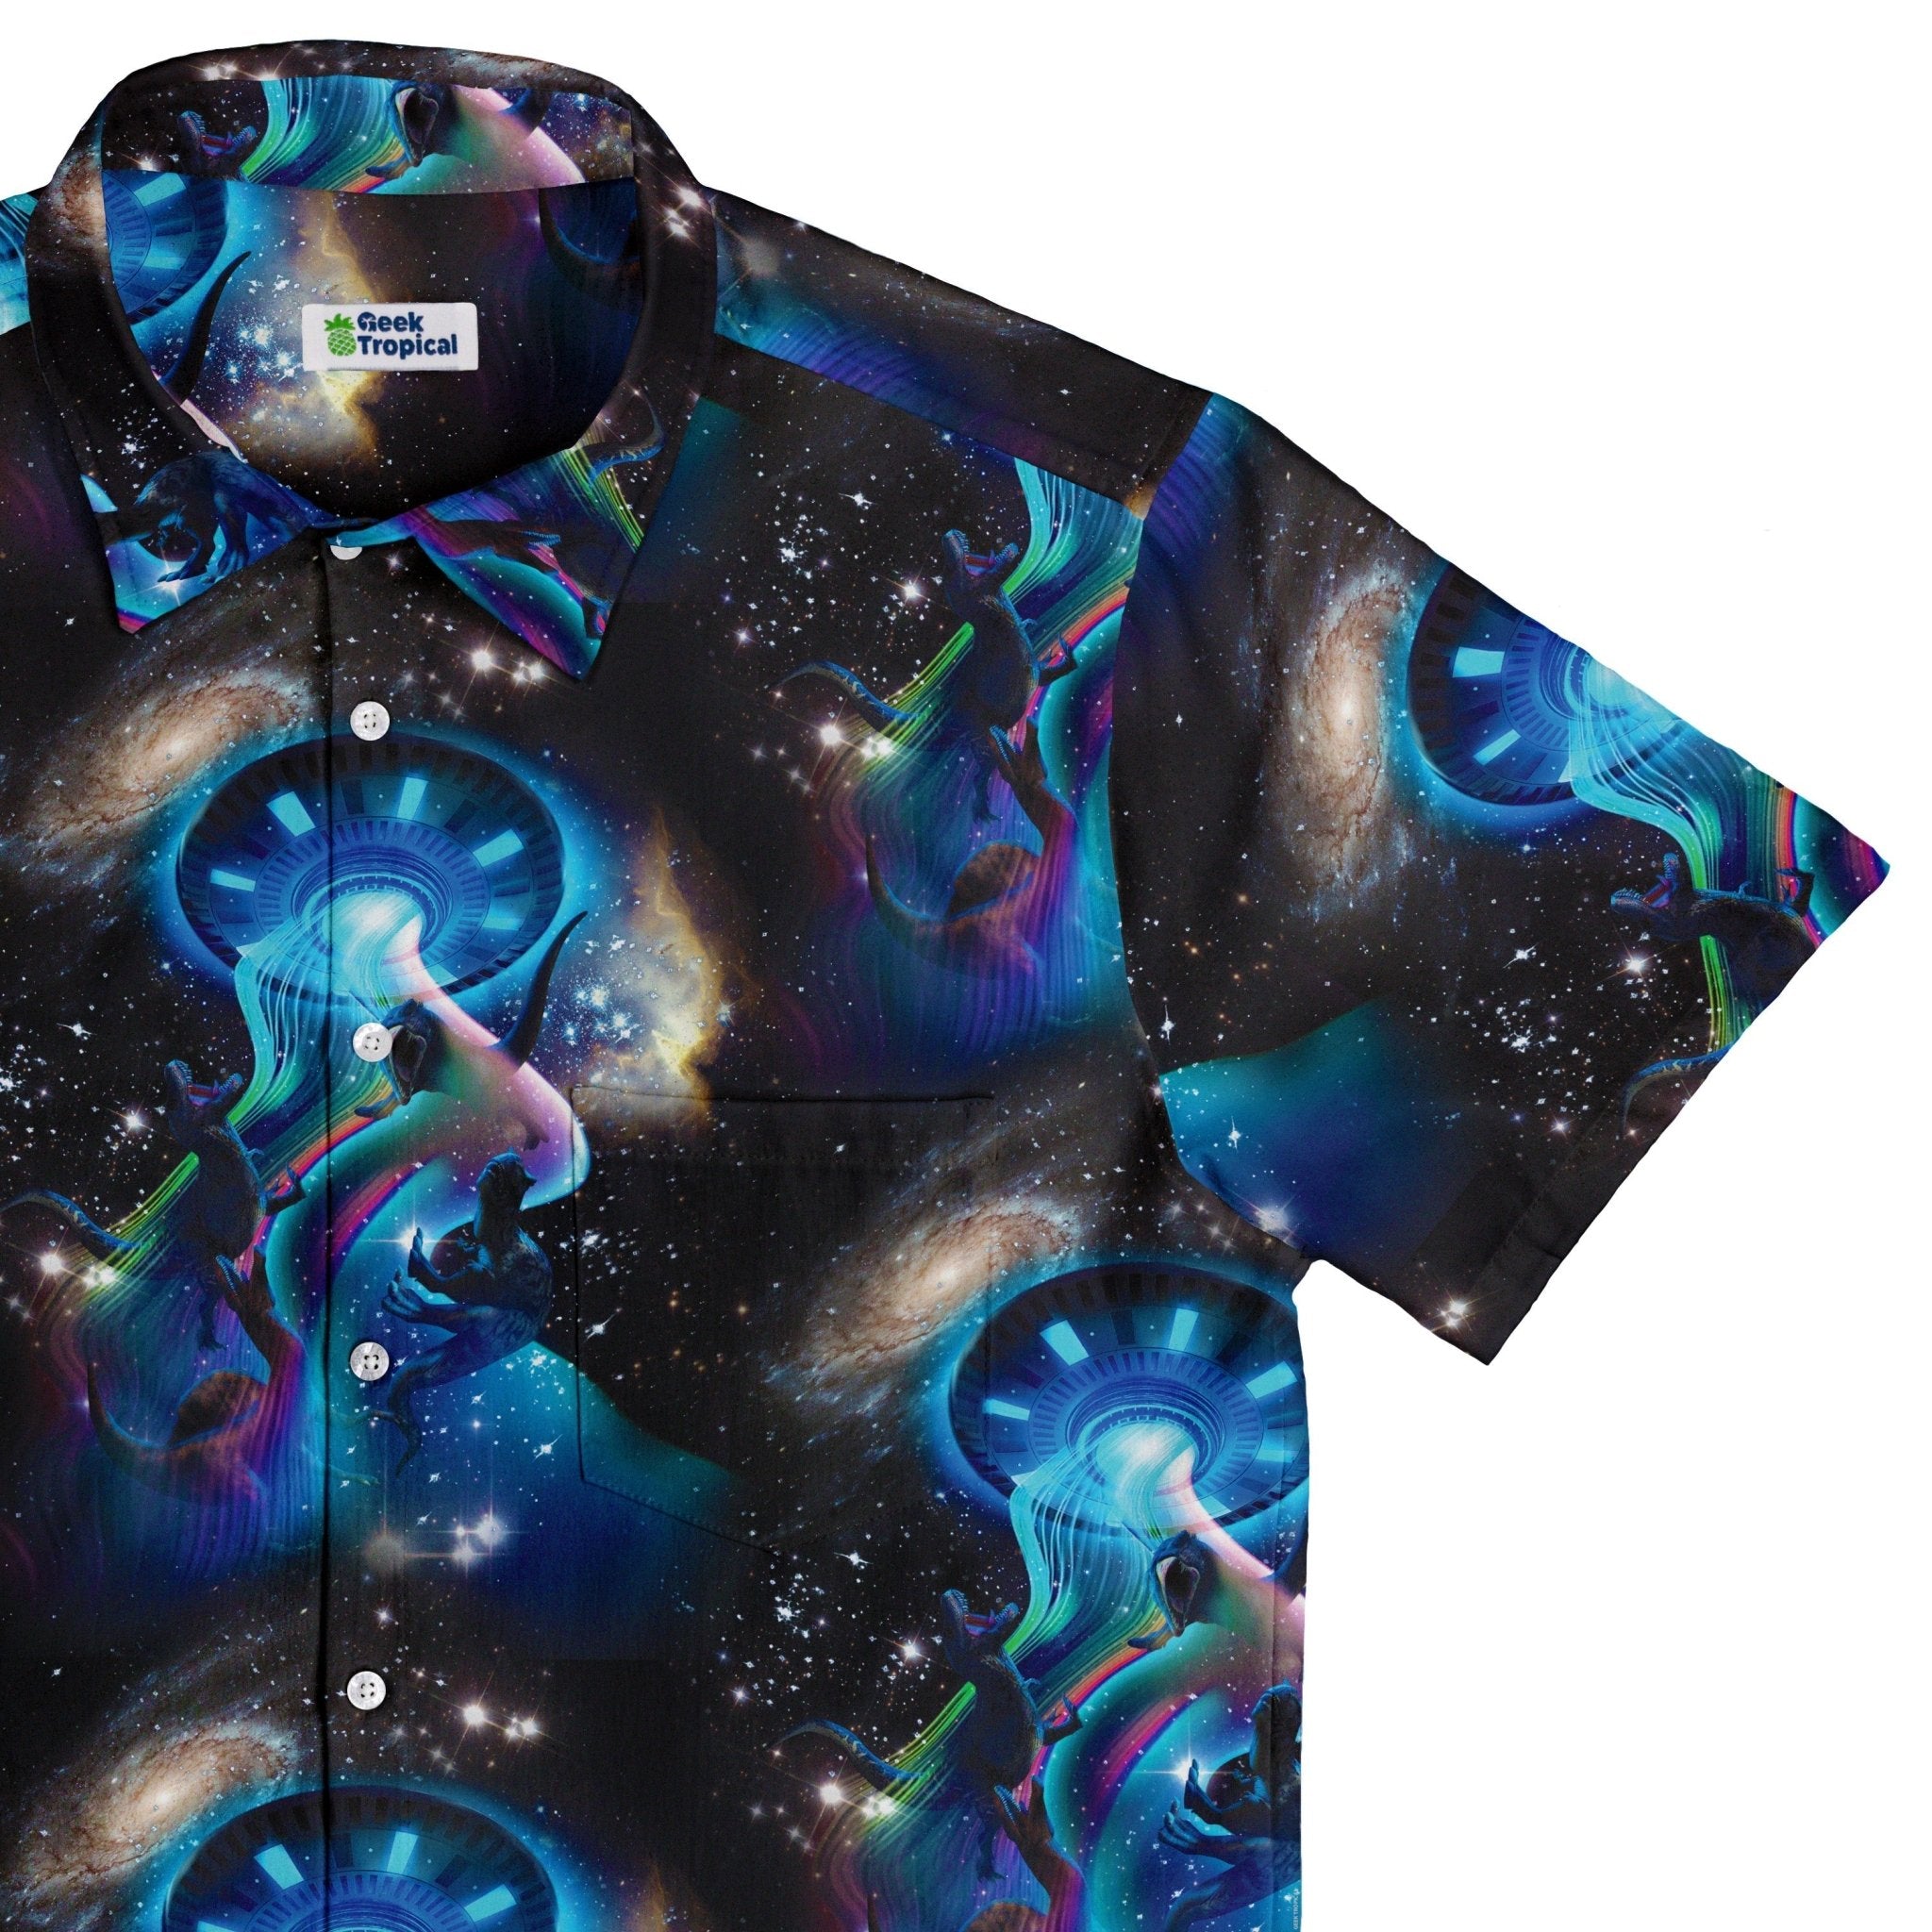 UFO Abduction of Dinosaurs Button Up Shirt - adult sizing - Design by Random Galaxy - Maximalist Patterns